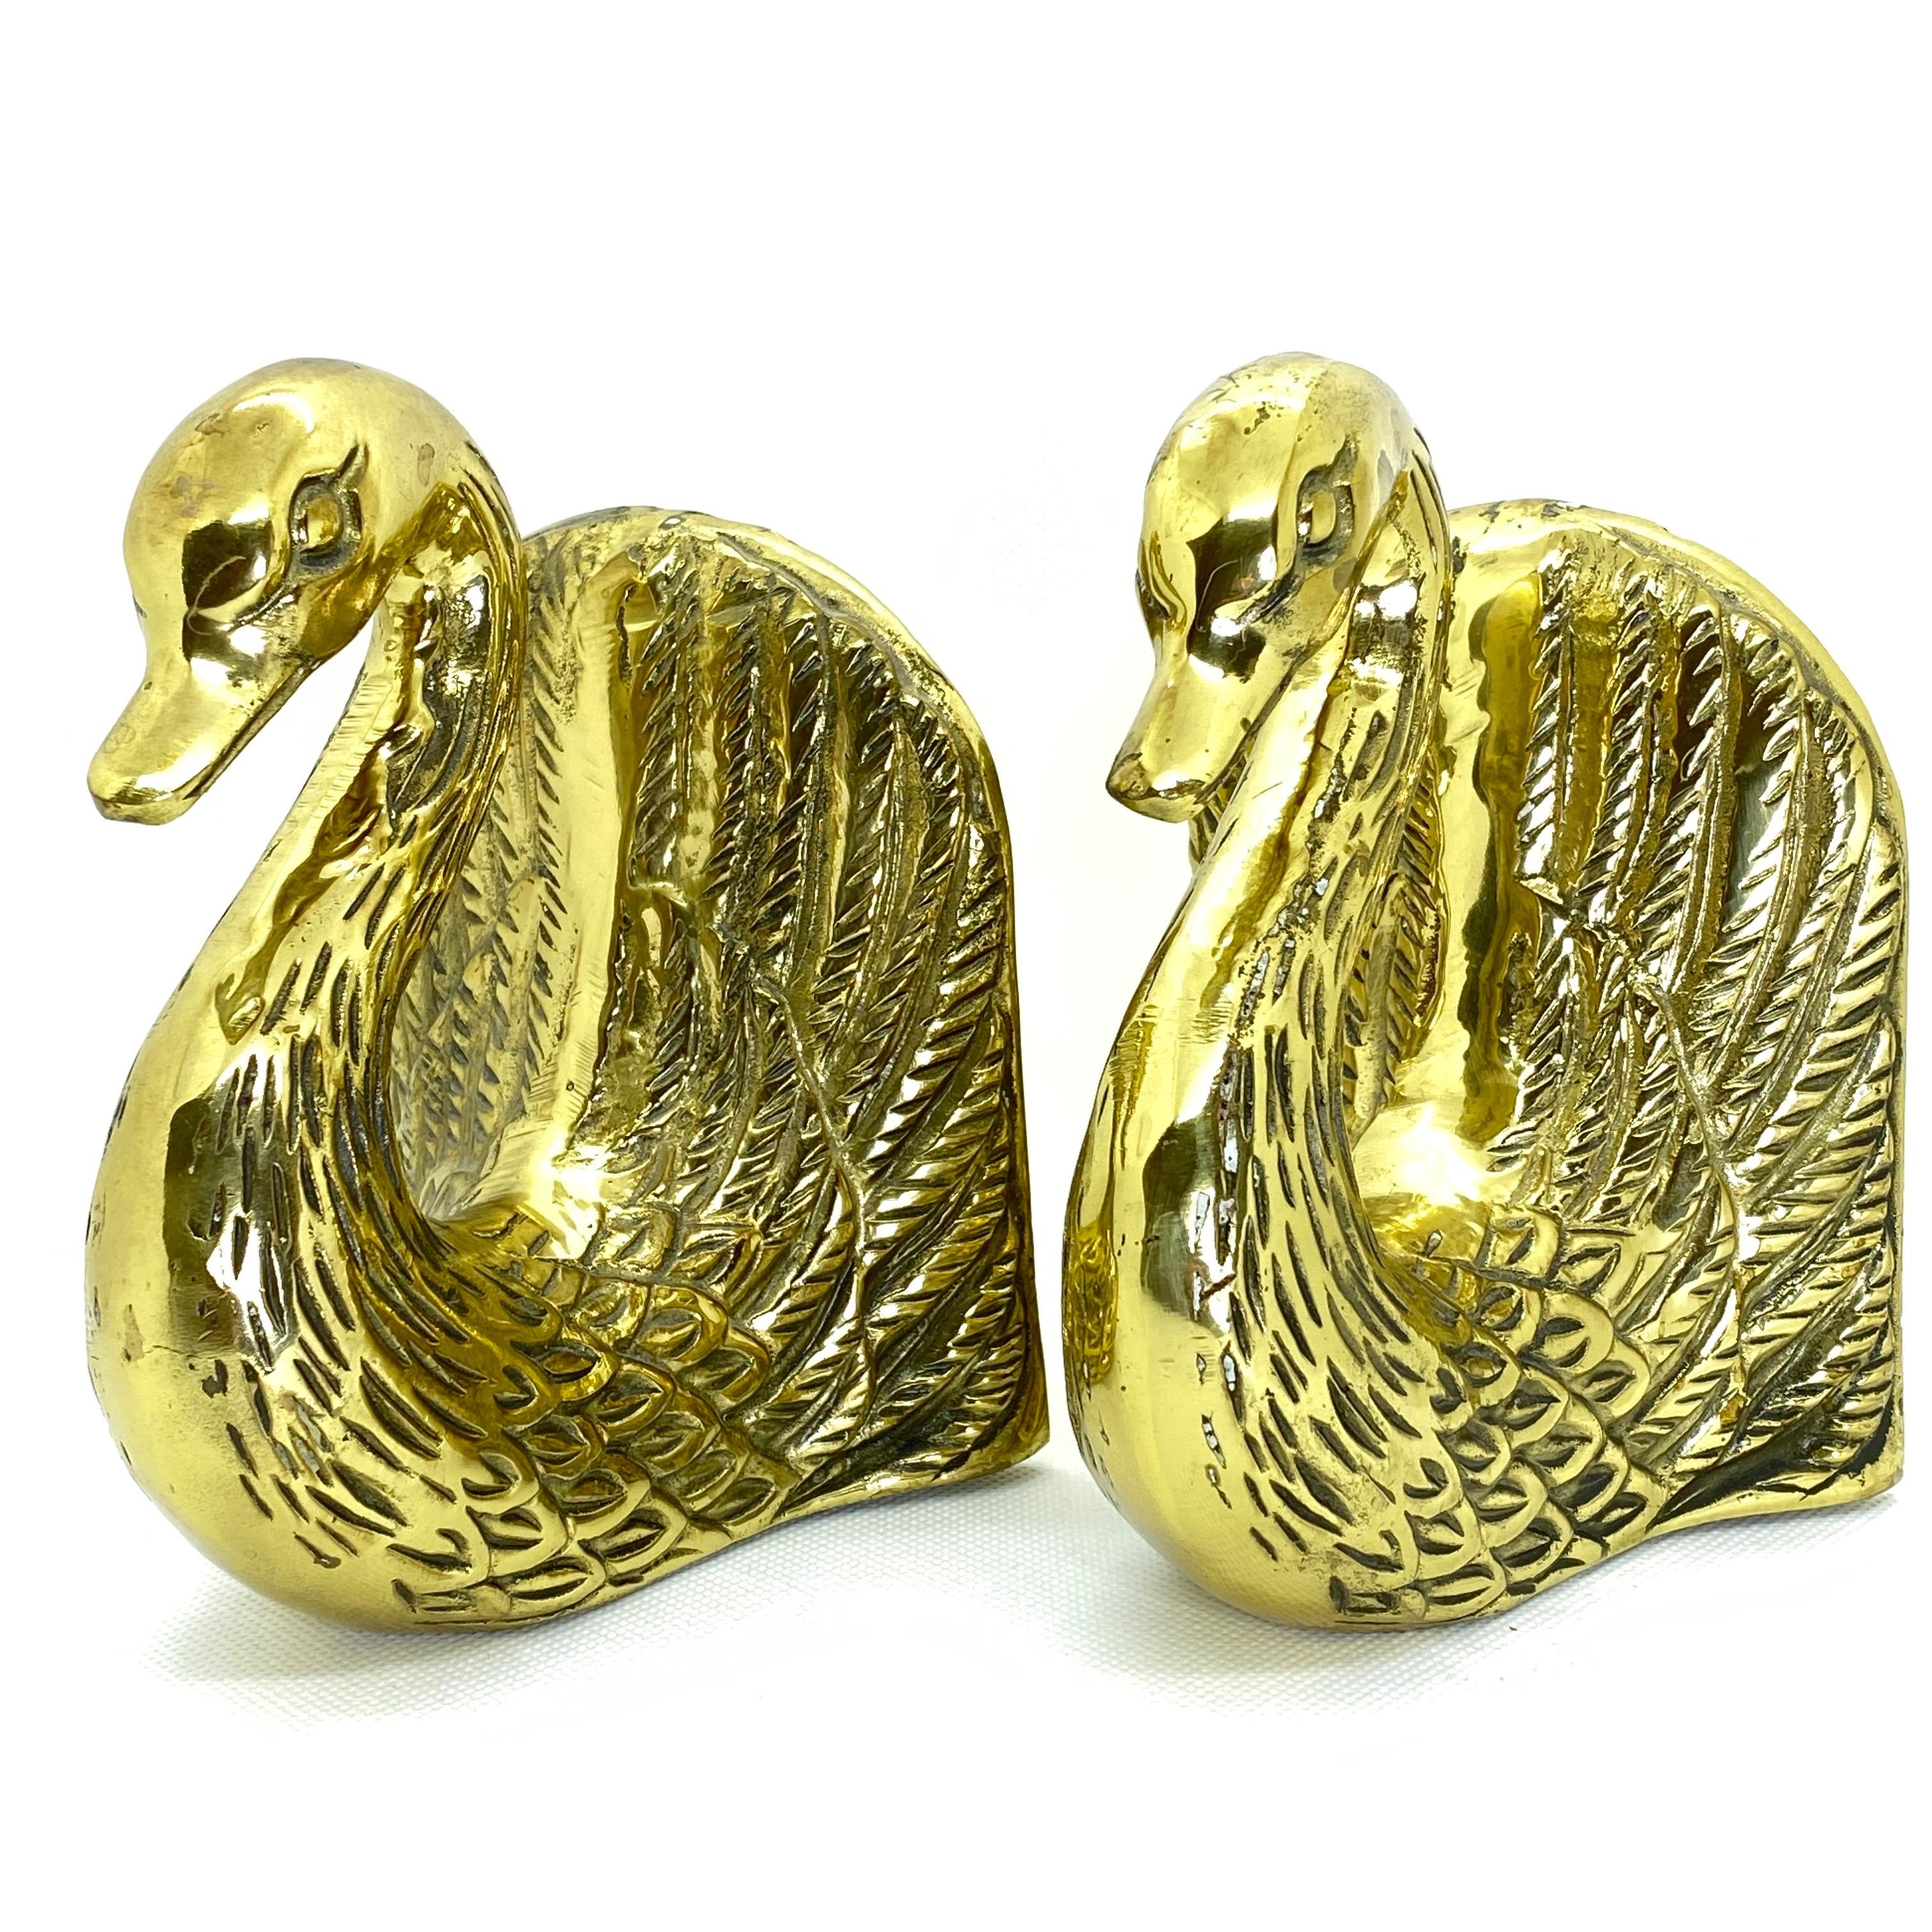 Vintage pair of polished cast brass Swan bookends, circa 1950. Very sturdy and heavy. Great for holding up books on a bookshelf or as paper weights on a desk or decorative animal sculptures around the house. They have a beautiful patina.